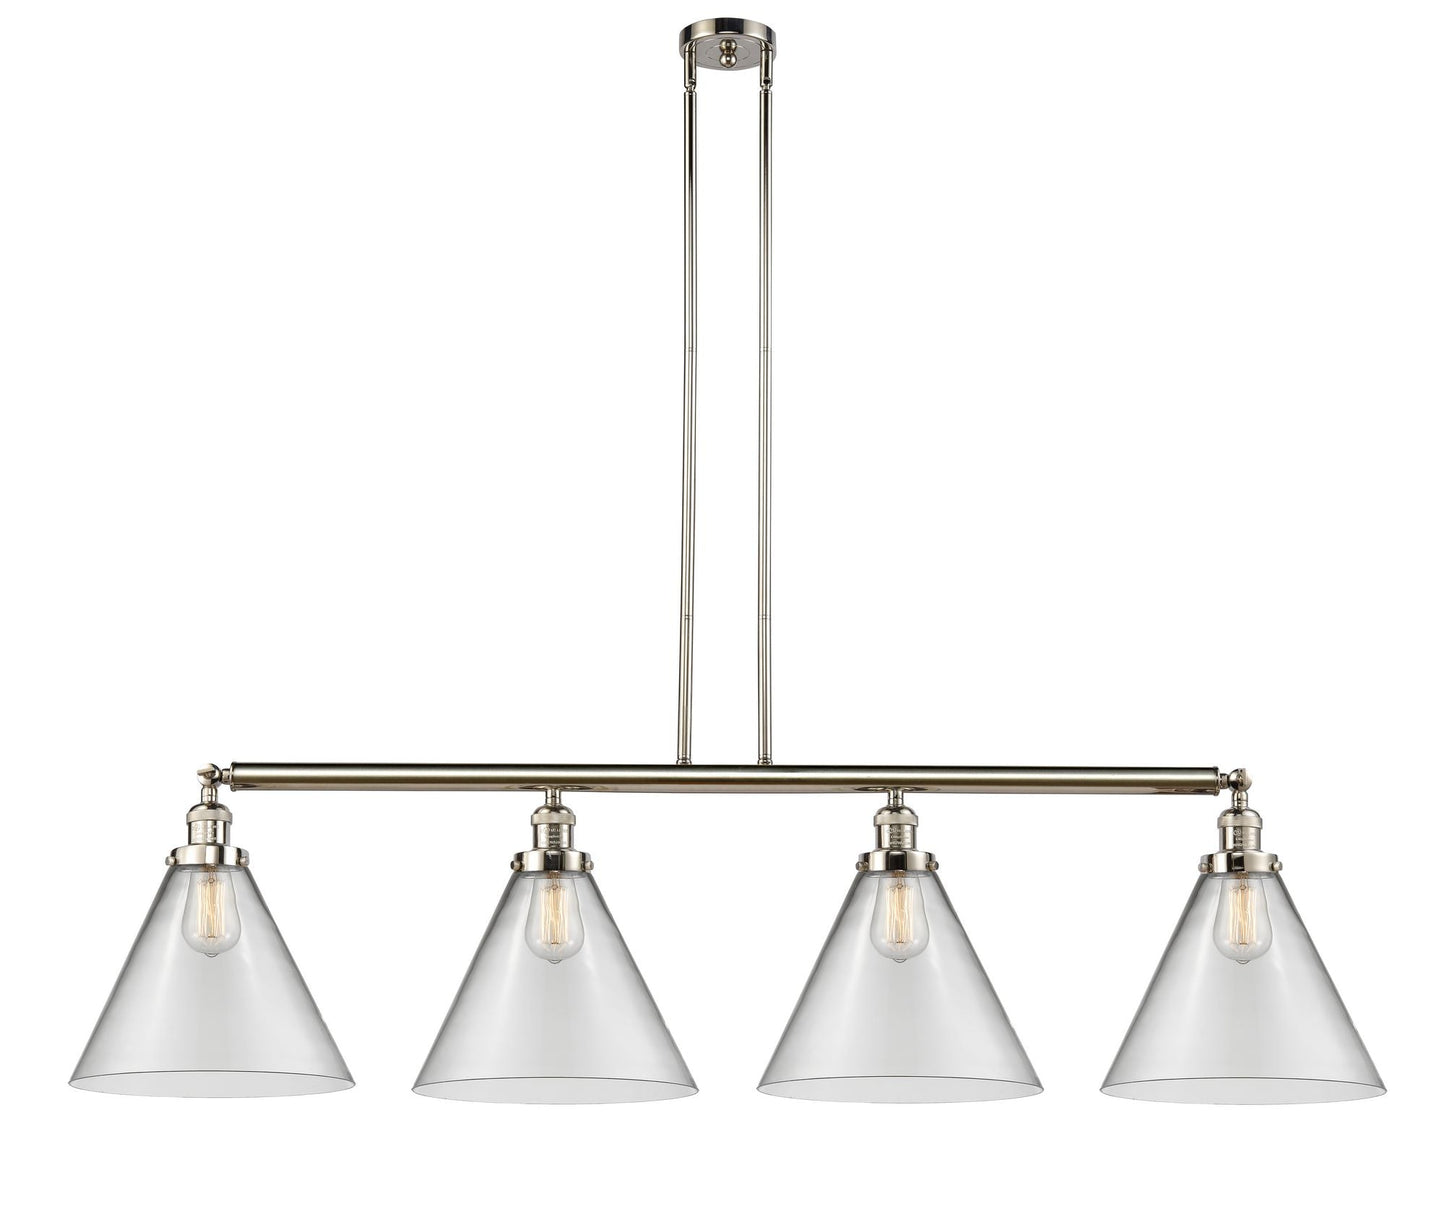 214-PN-G42-L 4-Light 56" Polished Nickel Island Light - Clear Cone 12" Glass - LED Bulb - Dimmensions: 56 x 12 x 14<br>Minimum Height : 24.25<br>Maximum Height : 48.25 - Sloped Ceiling Compatible: Yes